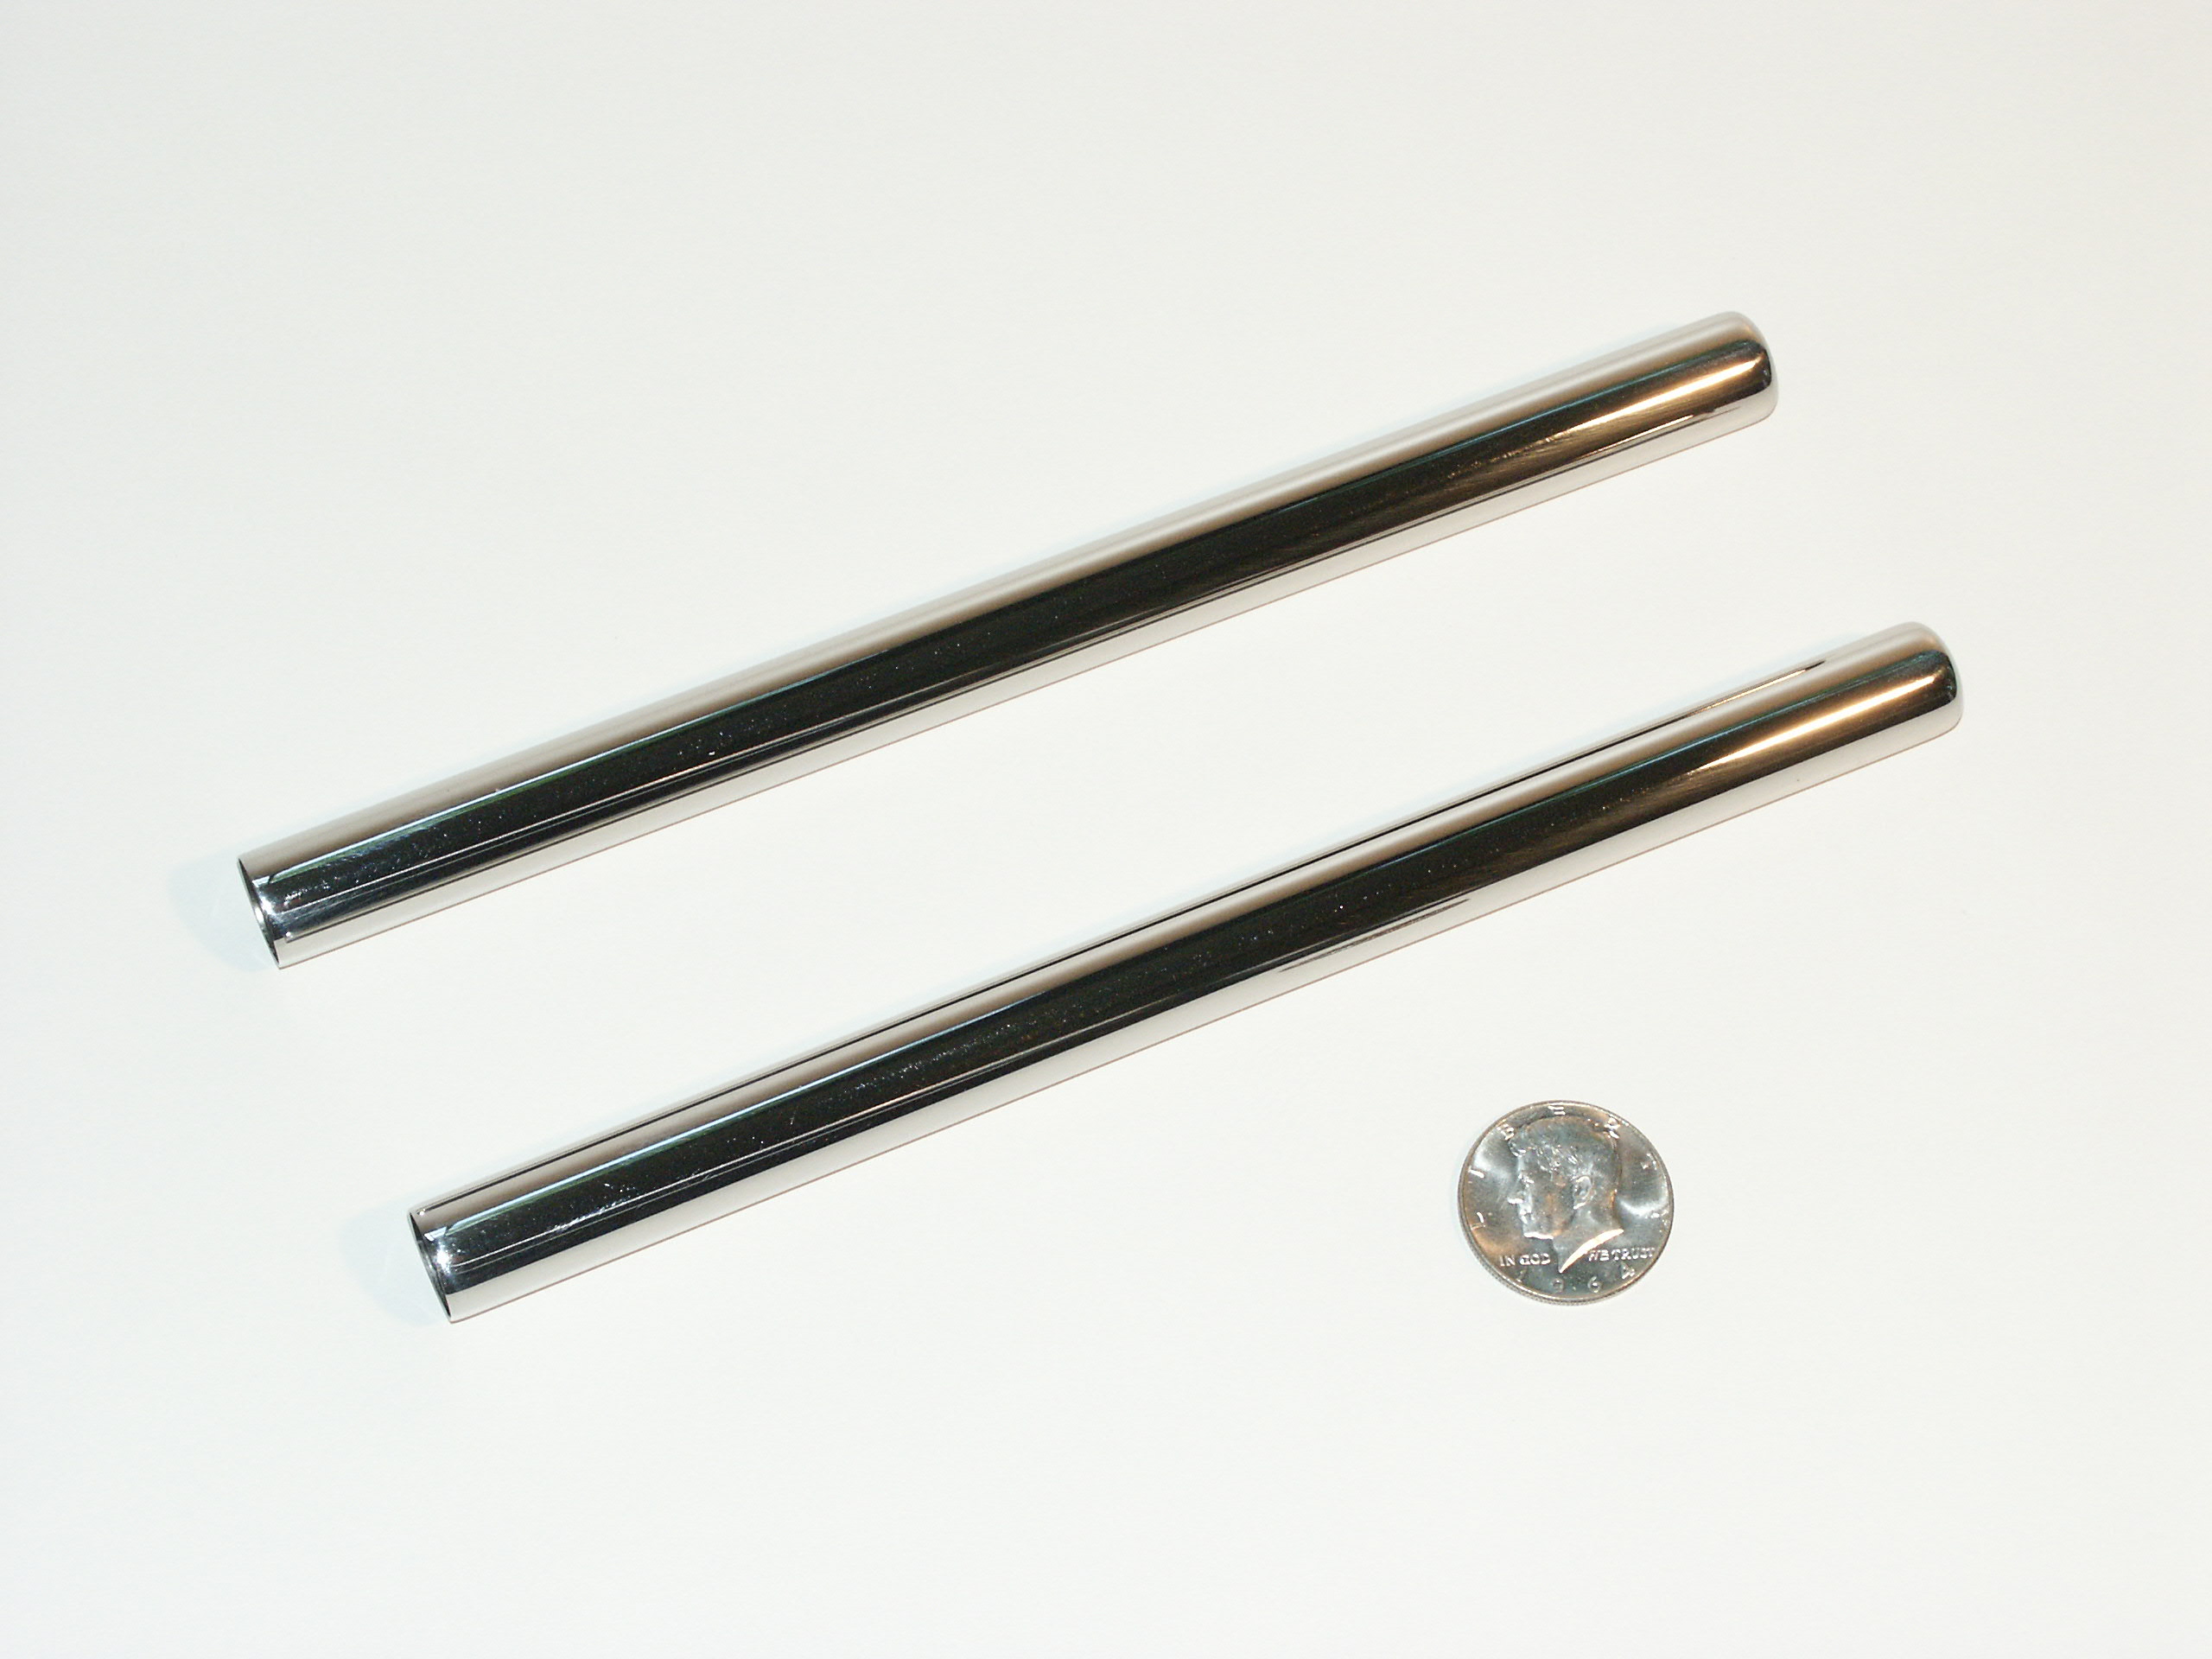 Bright Stainless Strut Covers for MGB Bonnet Lift Kits